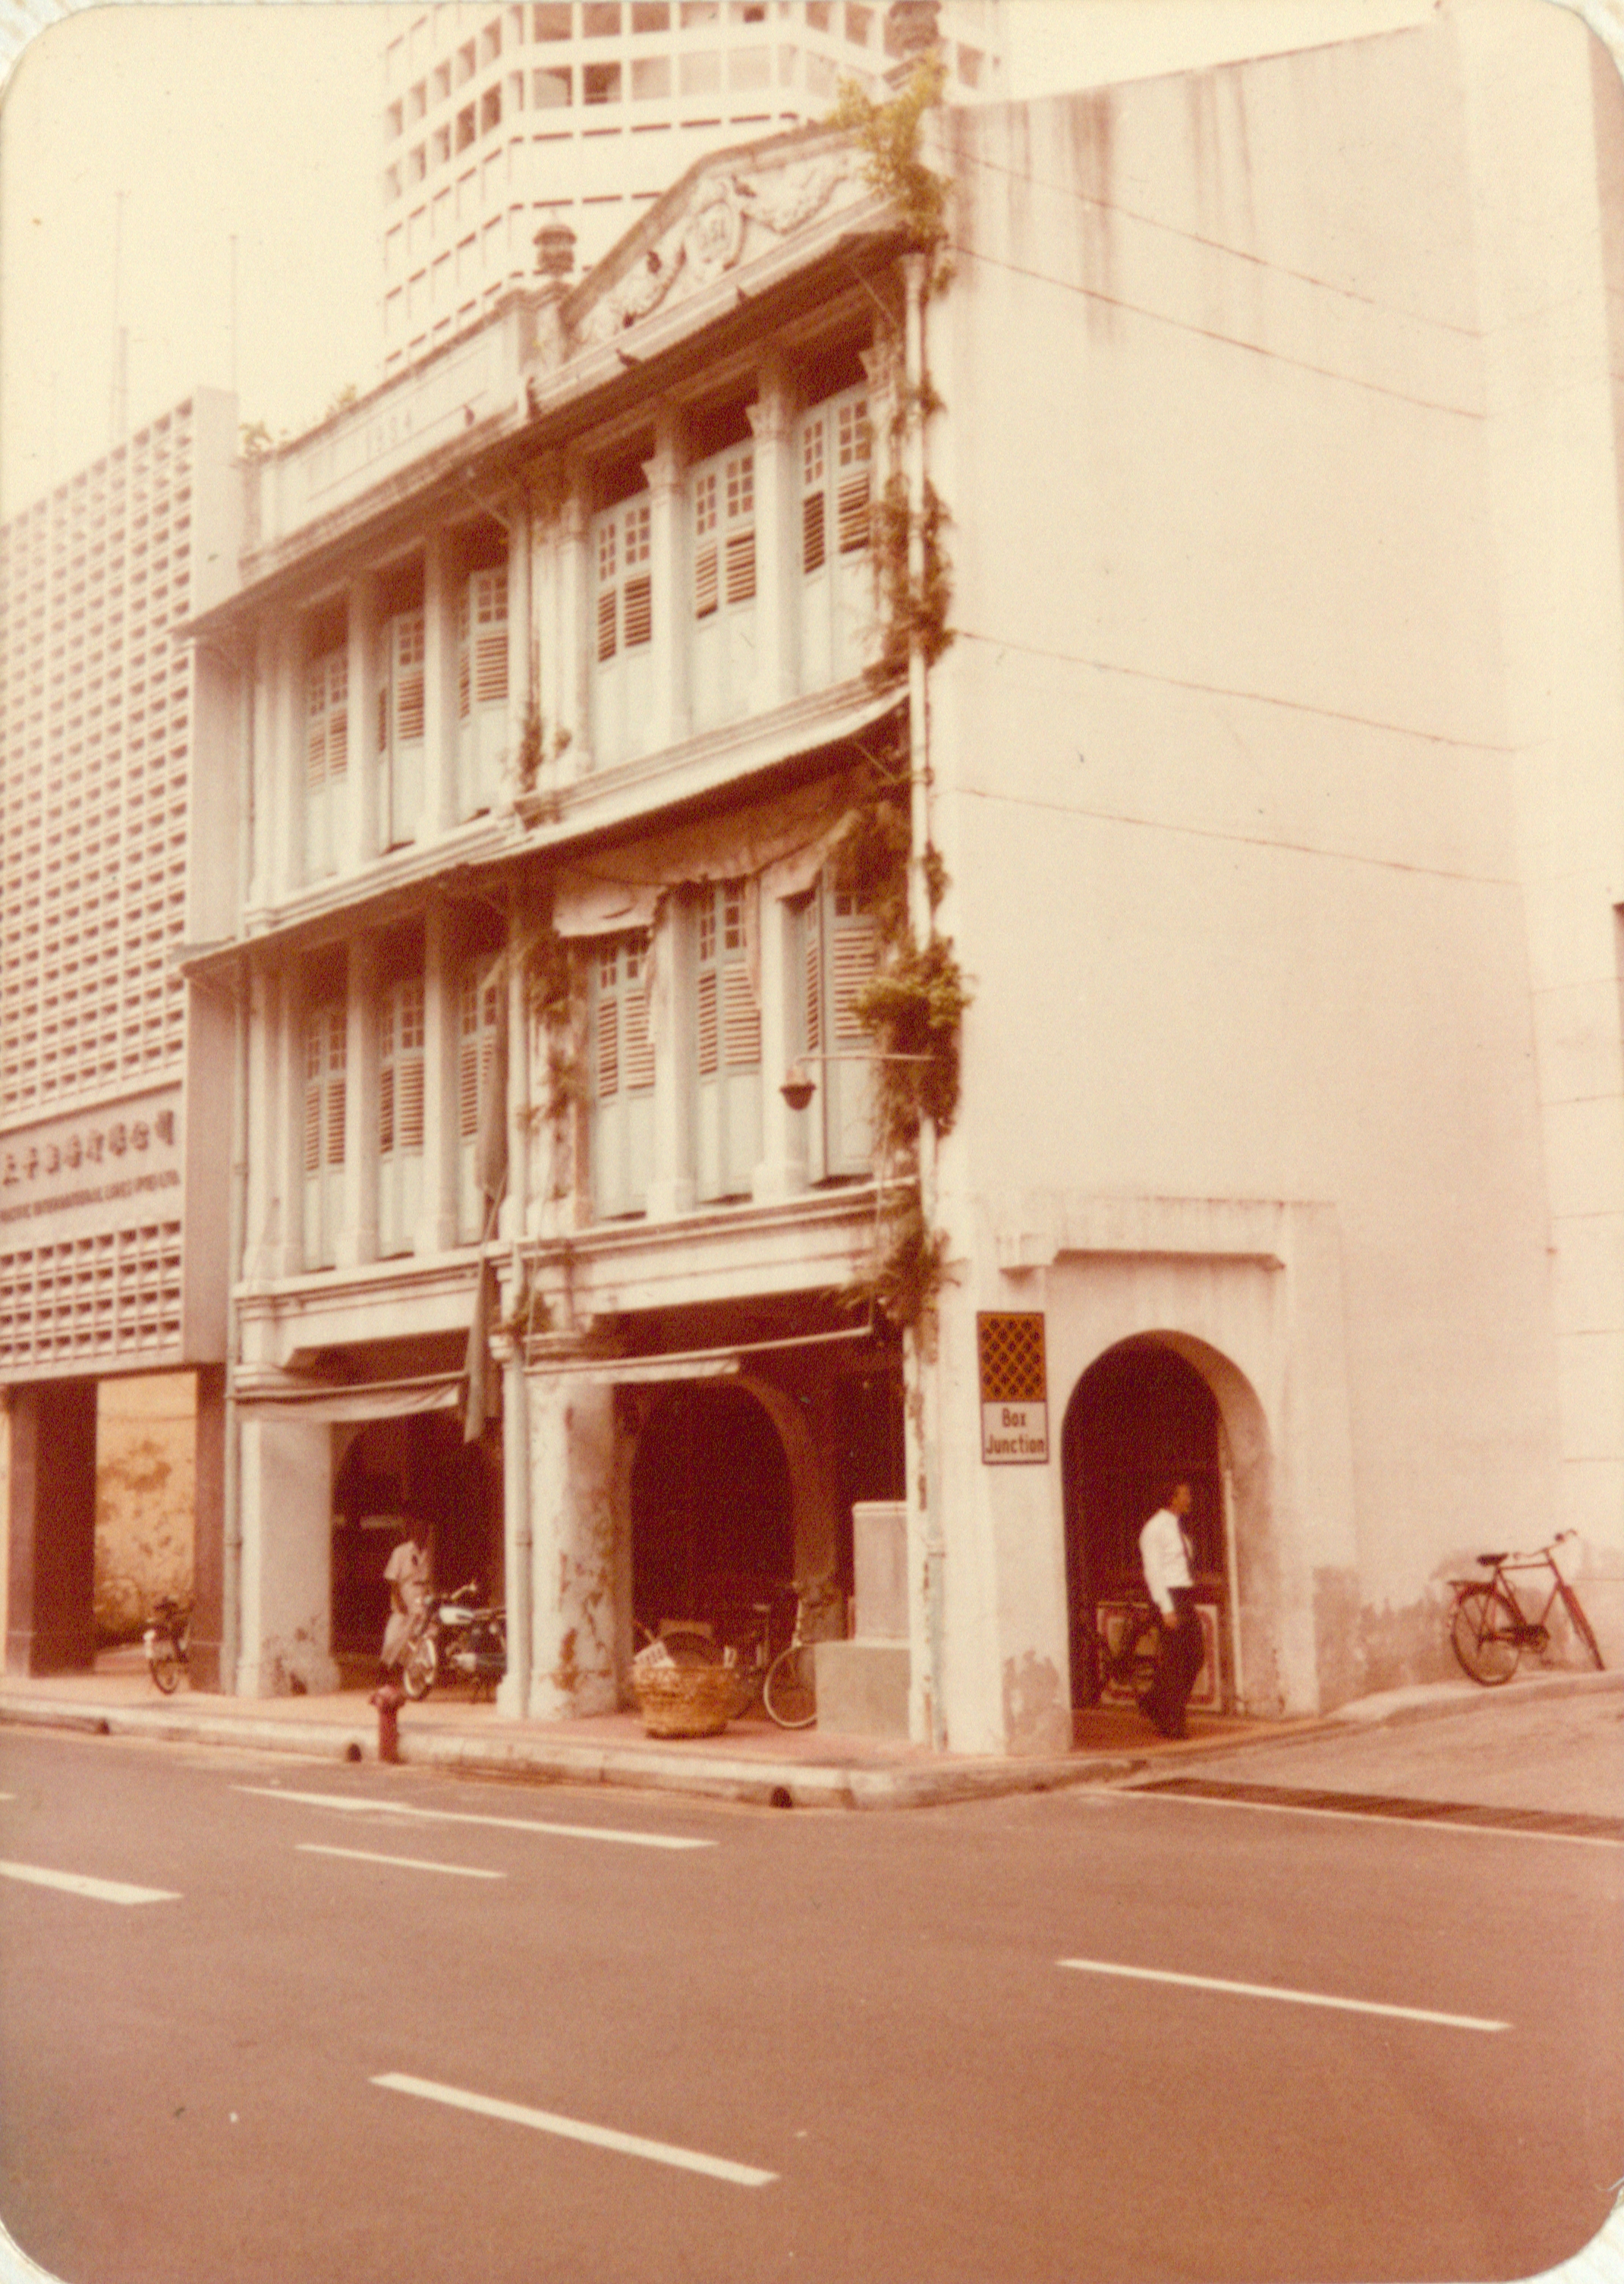 The building where the kittengi at 49 Market Street was located. Nachiappa Chettiar Collection, courtesy of National Archives of Singapore